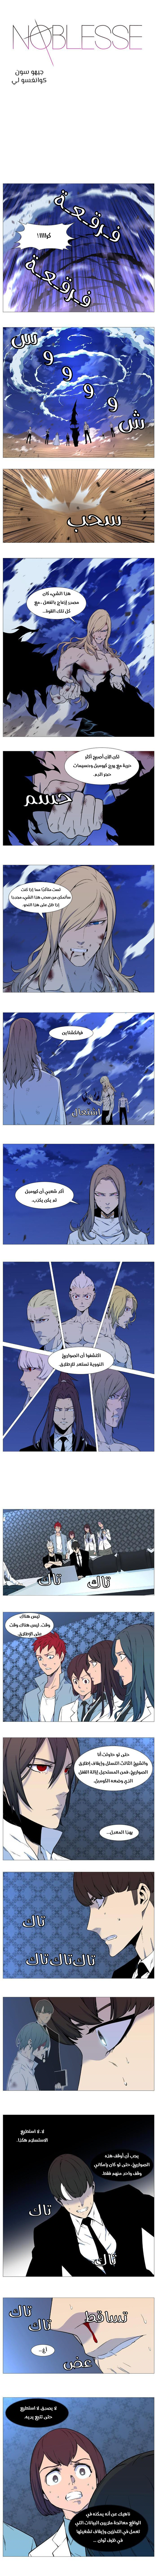 Noblesse: Chapter 542 - Page 1